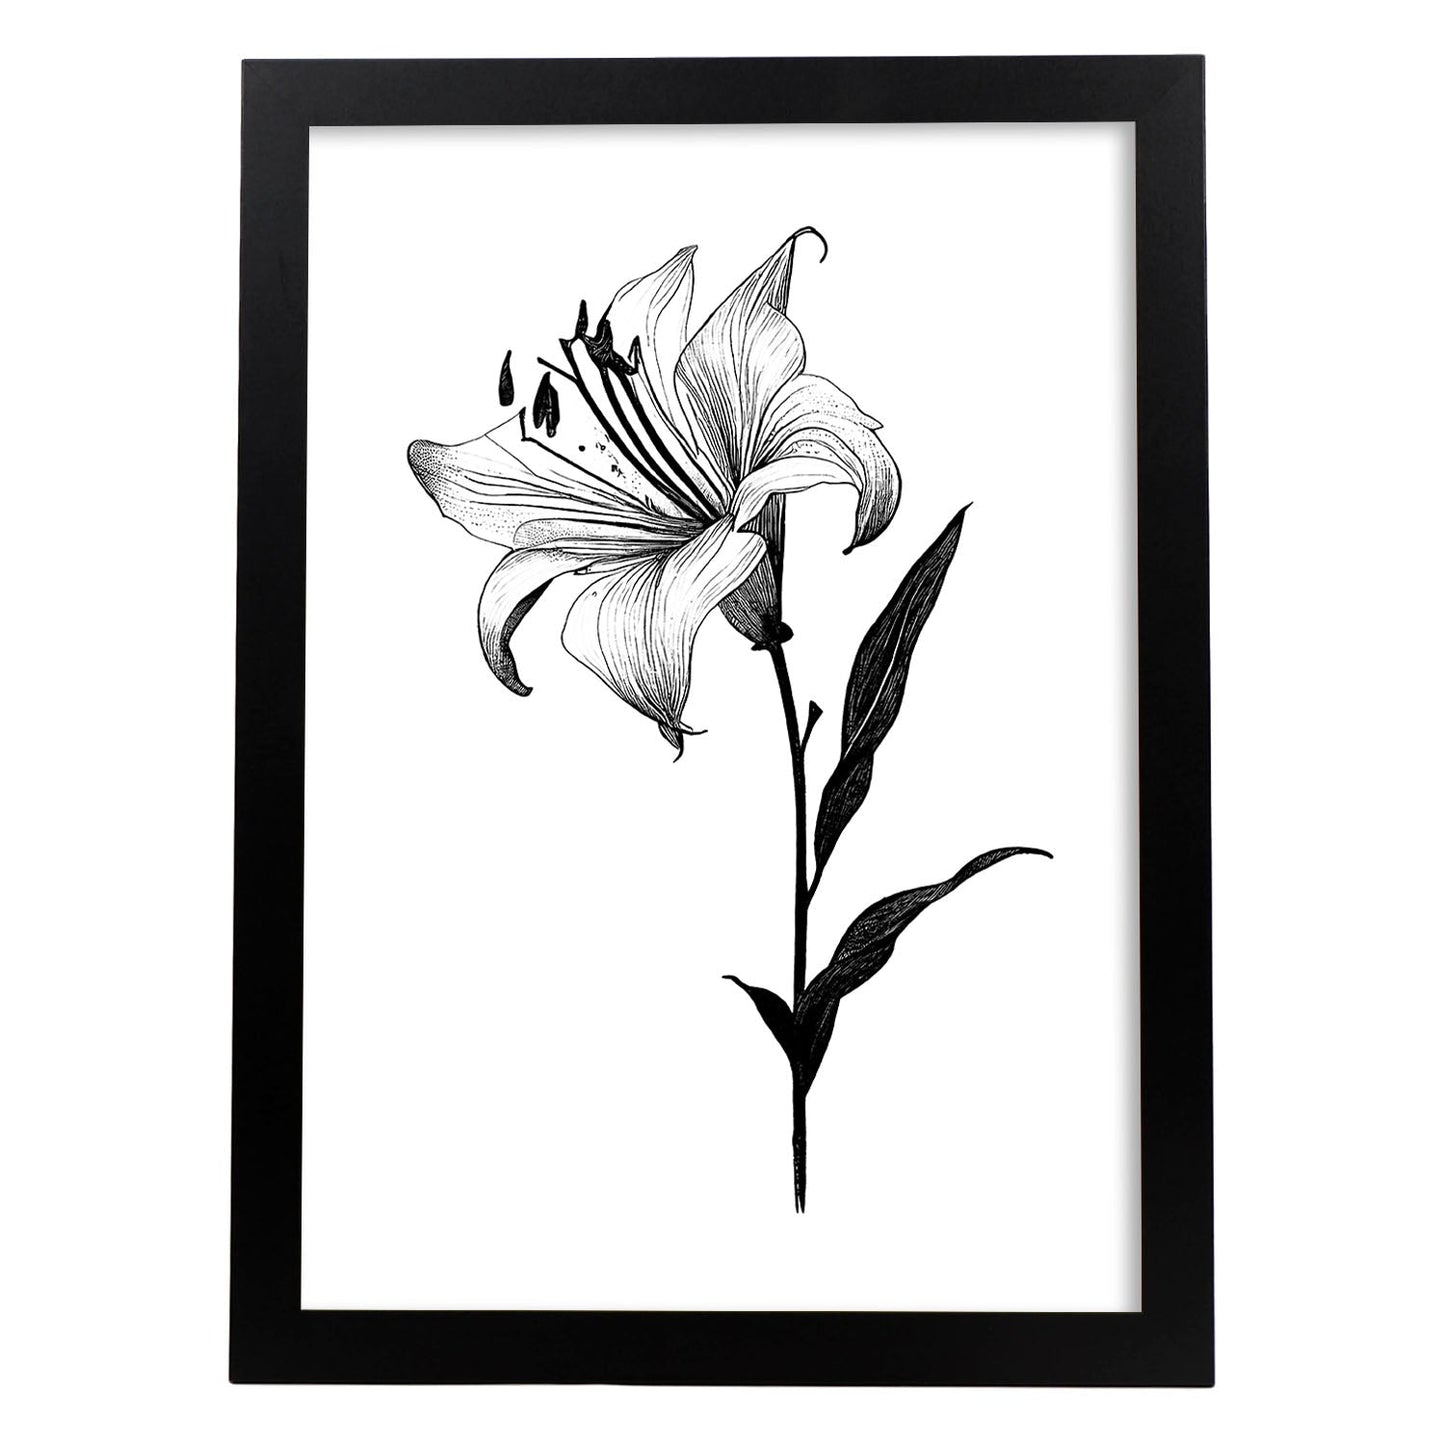 Nacnic Lily Minimalist Line Art_1. Aesthetic Wall Art Prints for Bedroom or Living Room Design.